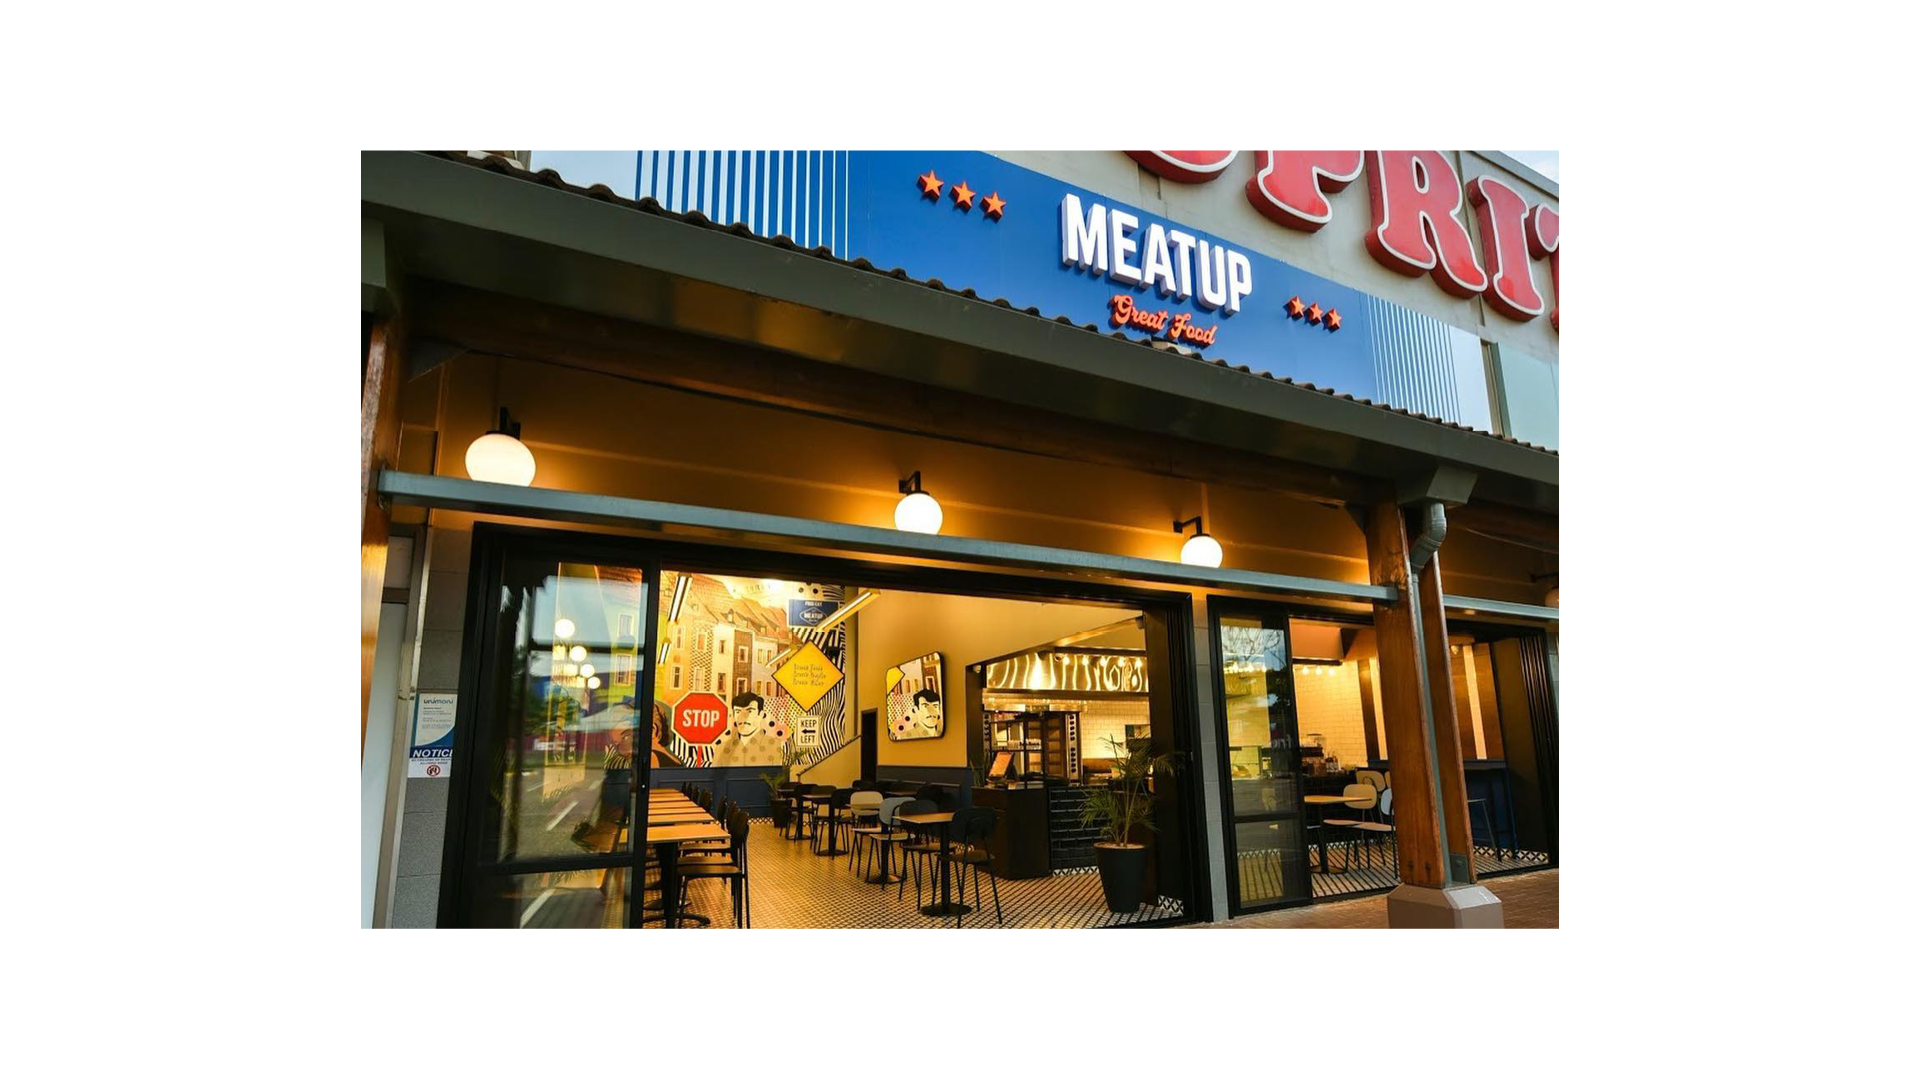 Meatup sign